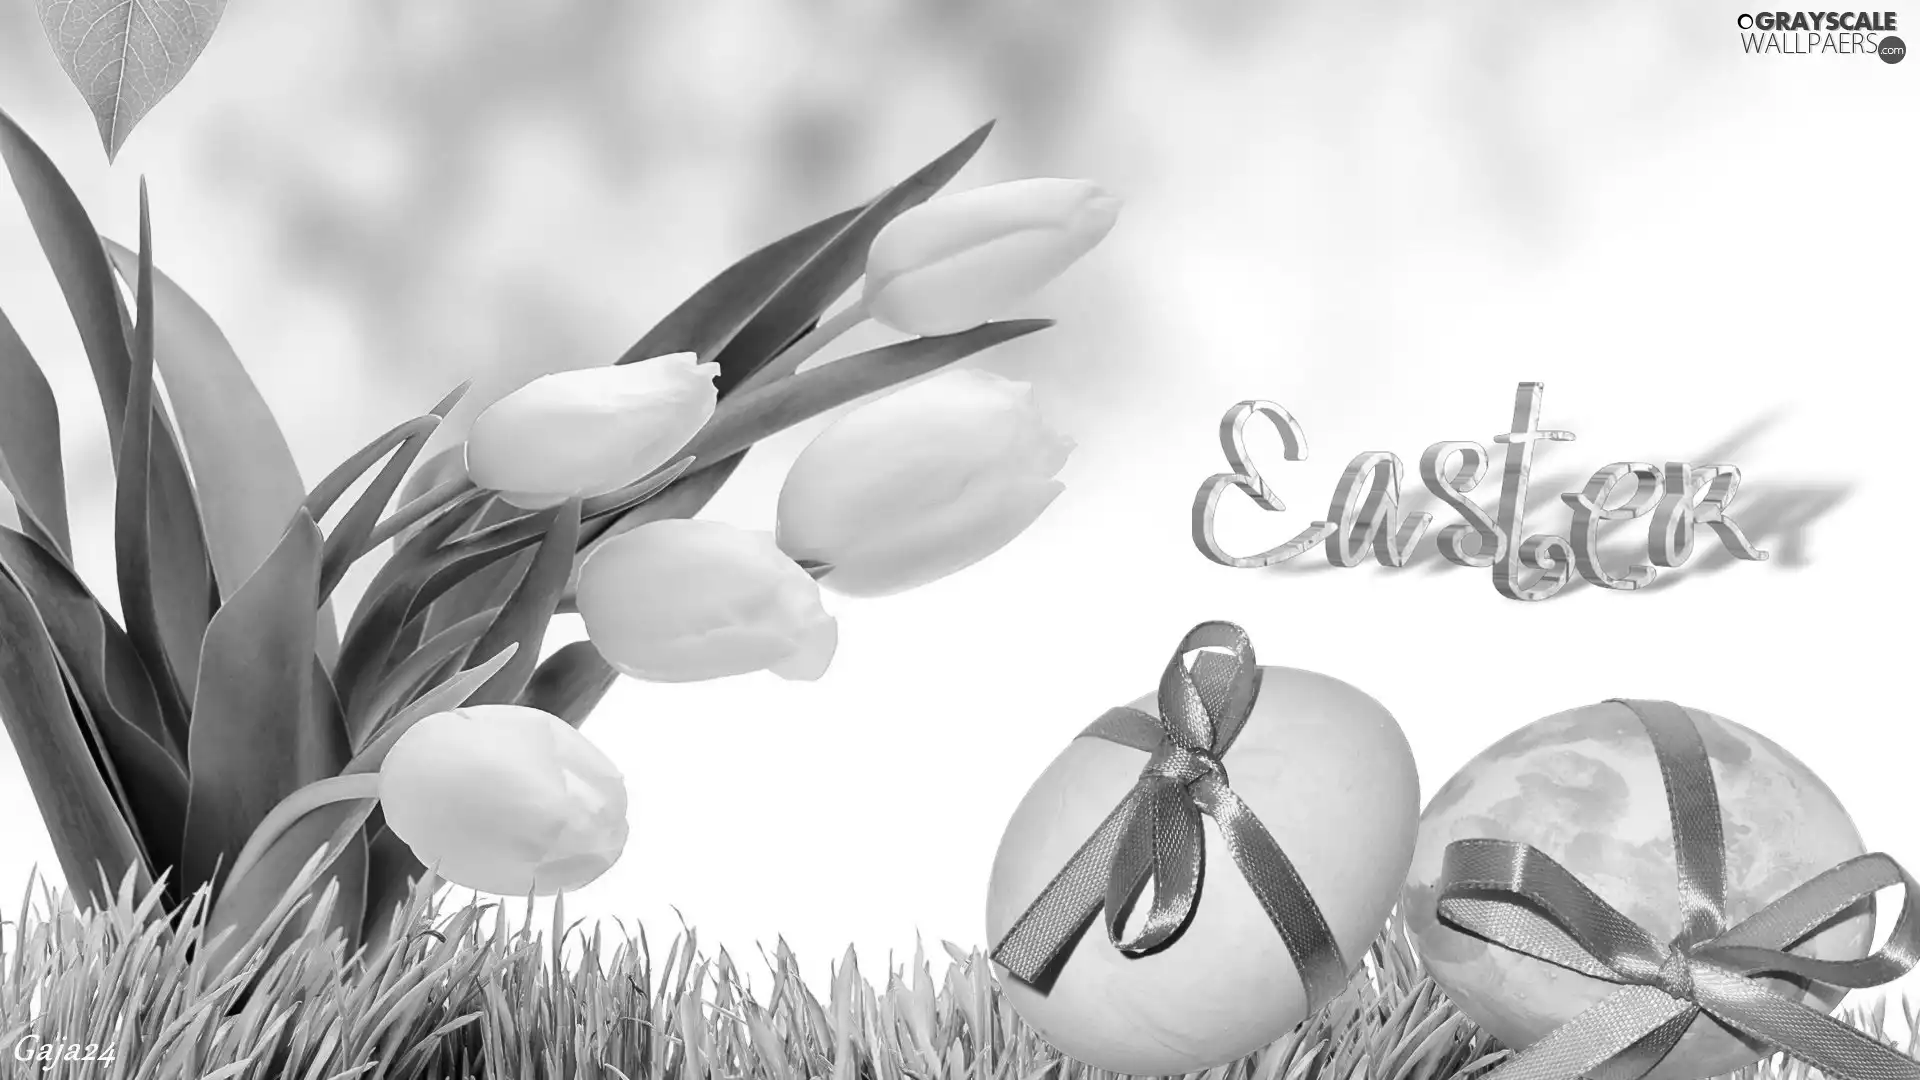 Tulips, eggs, Easter, text